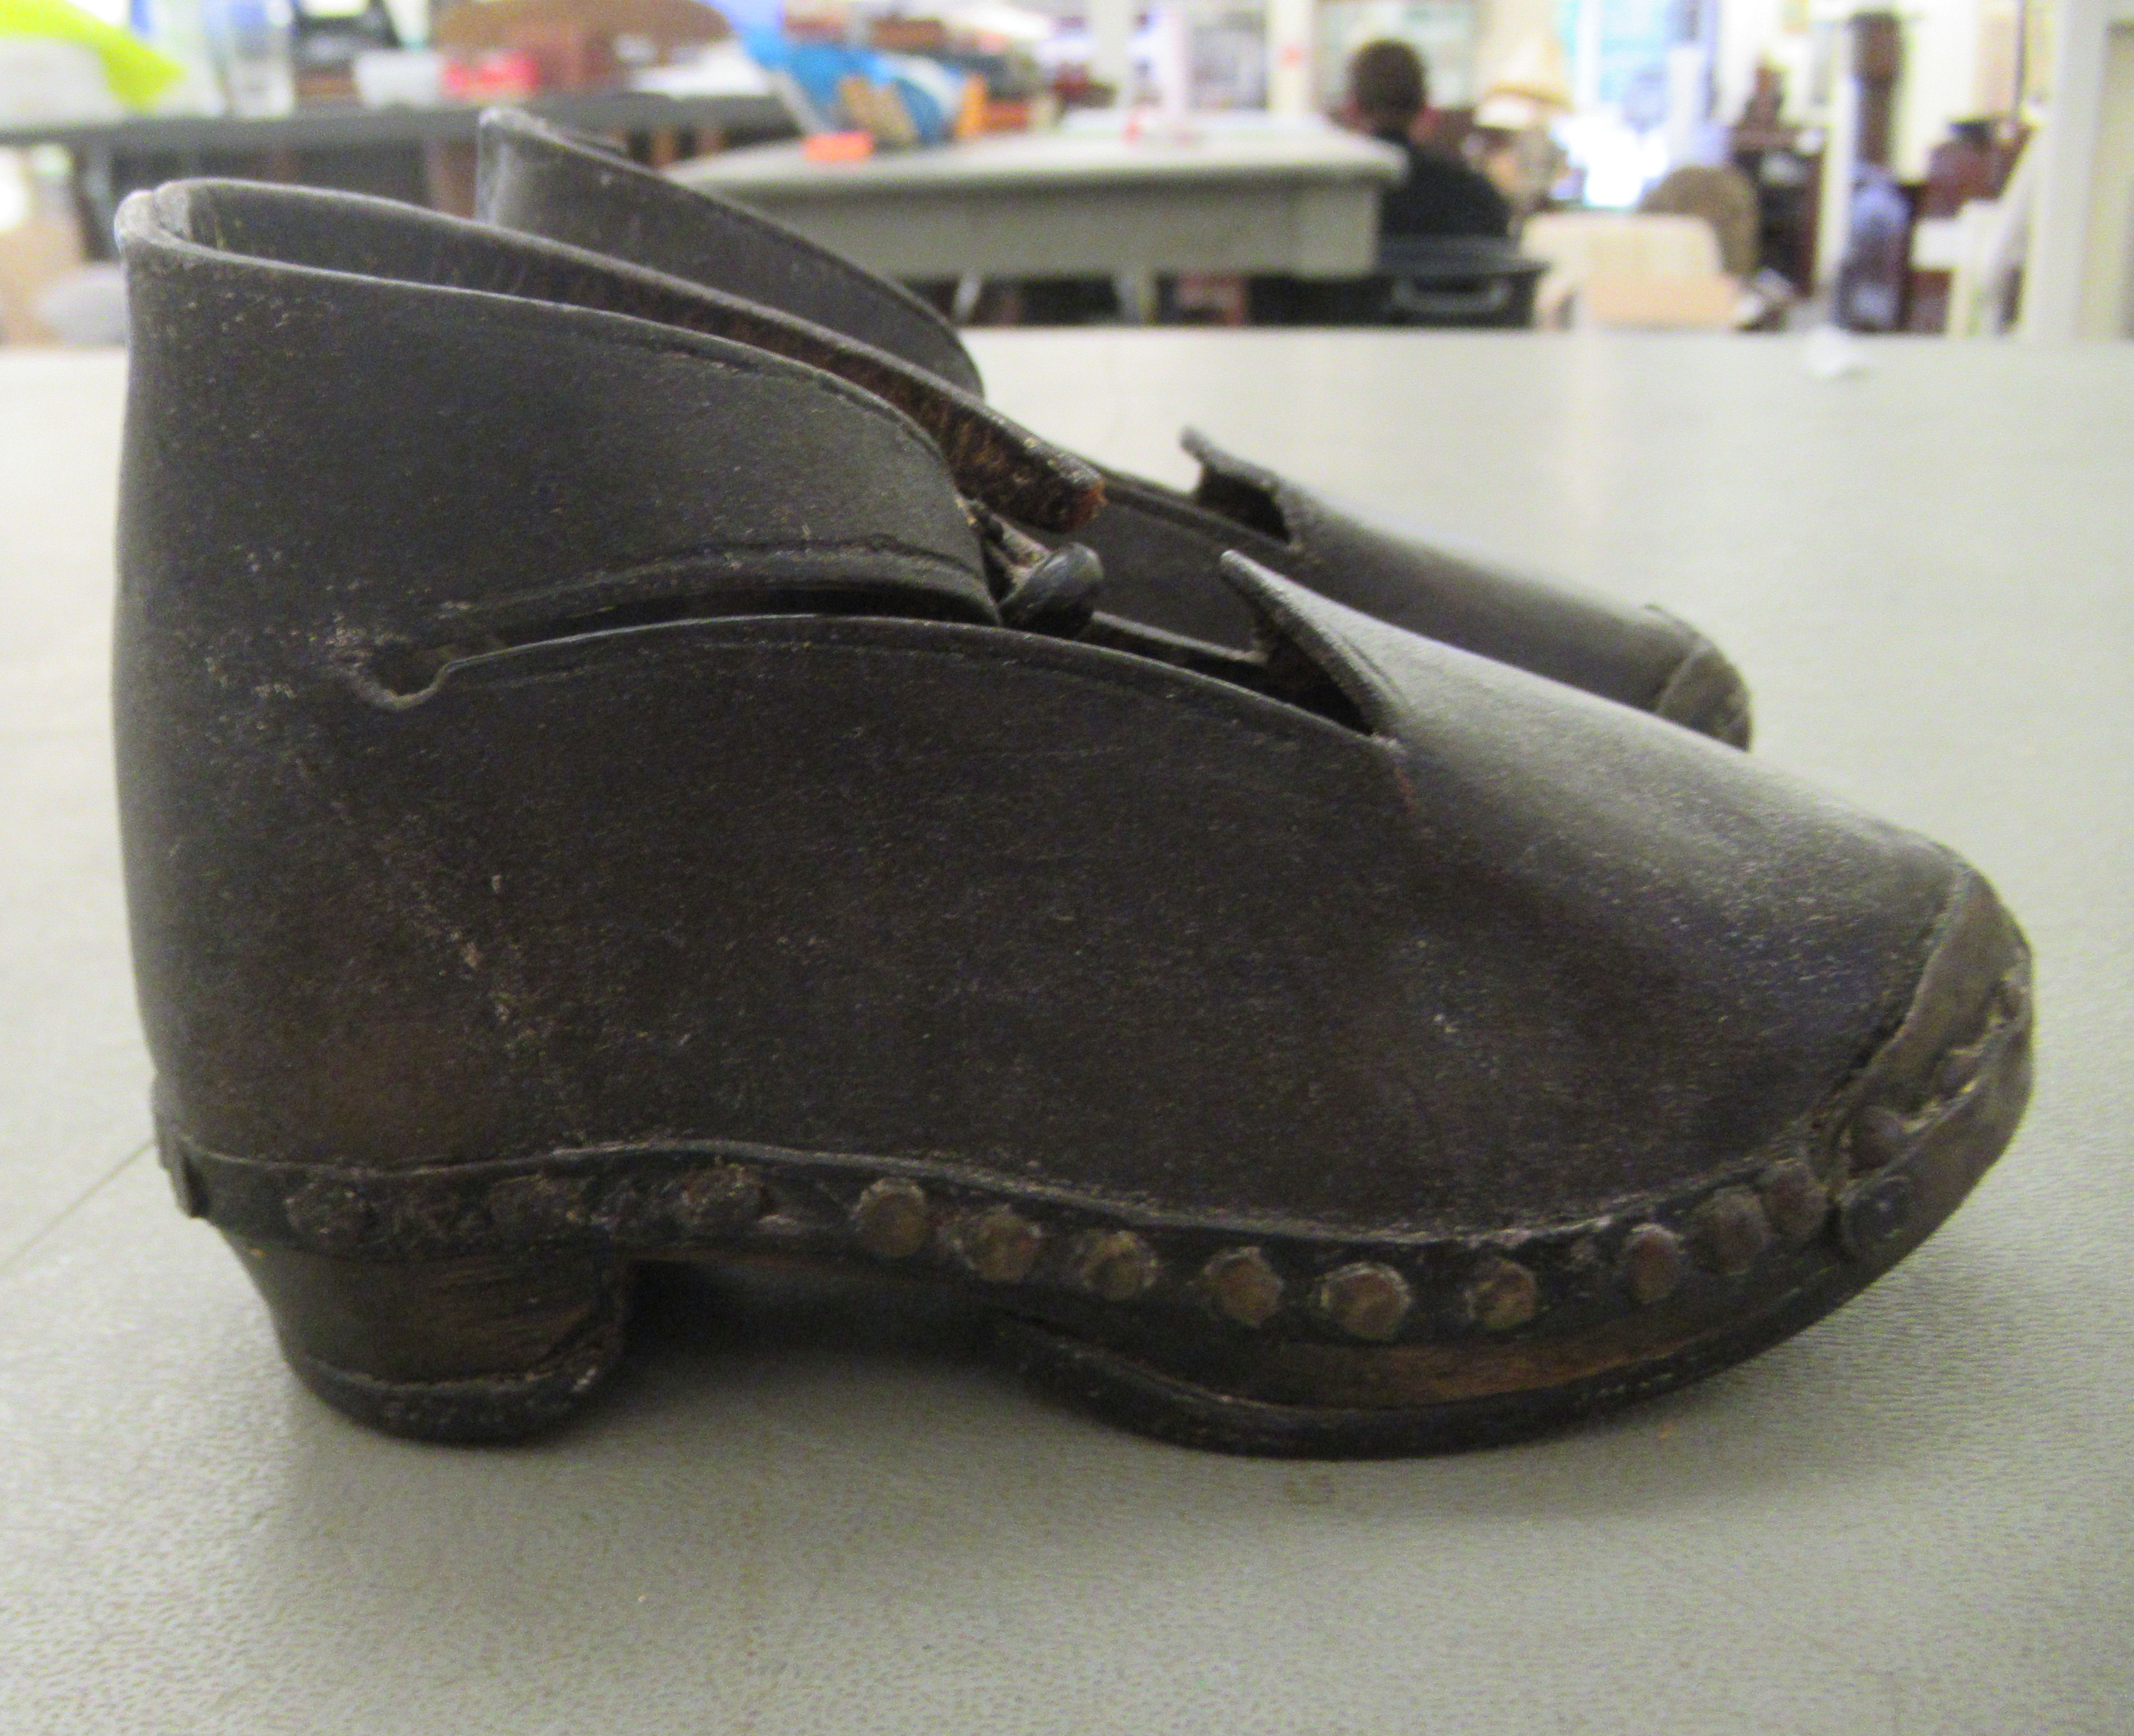 A child's pair of 19thC clogs with wooden soles and rivetted hide uppers